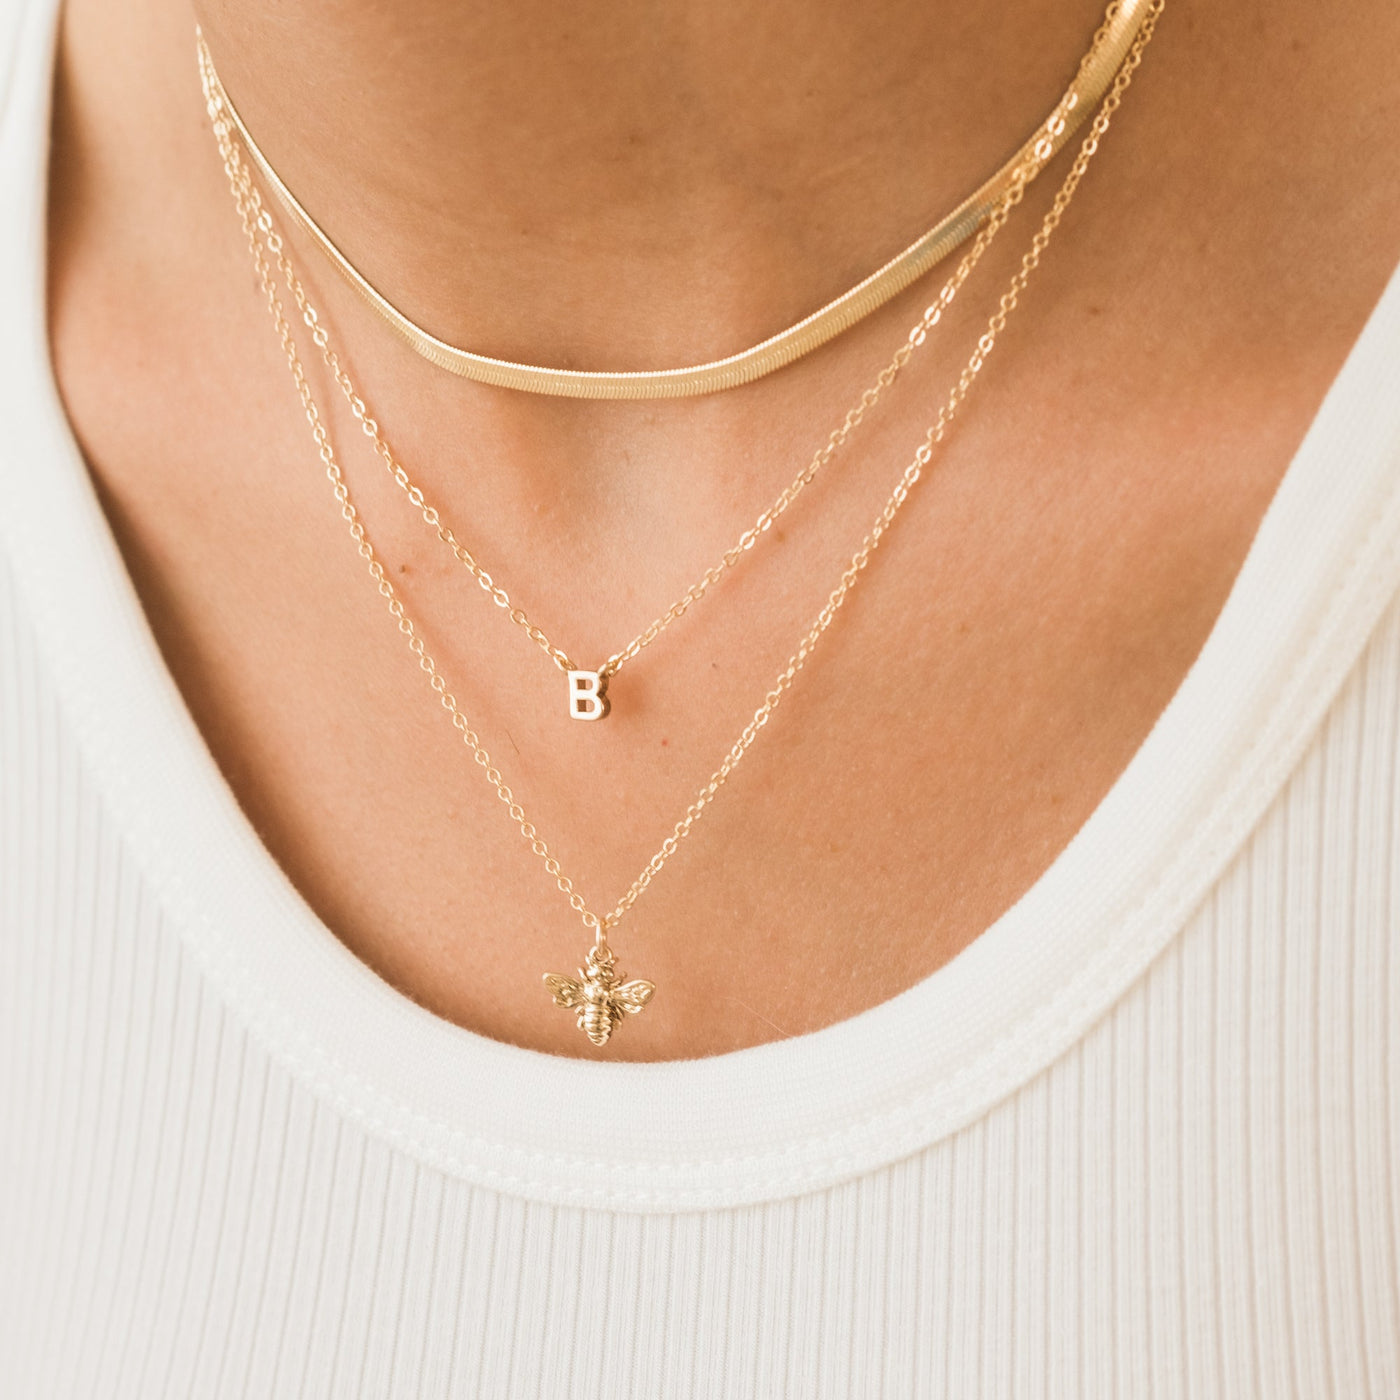 Honey Bee Necklace | Simple & Dainty Jewelry